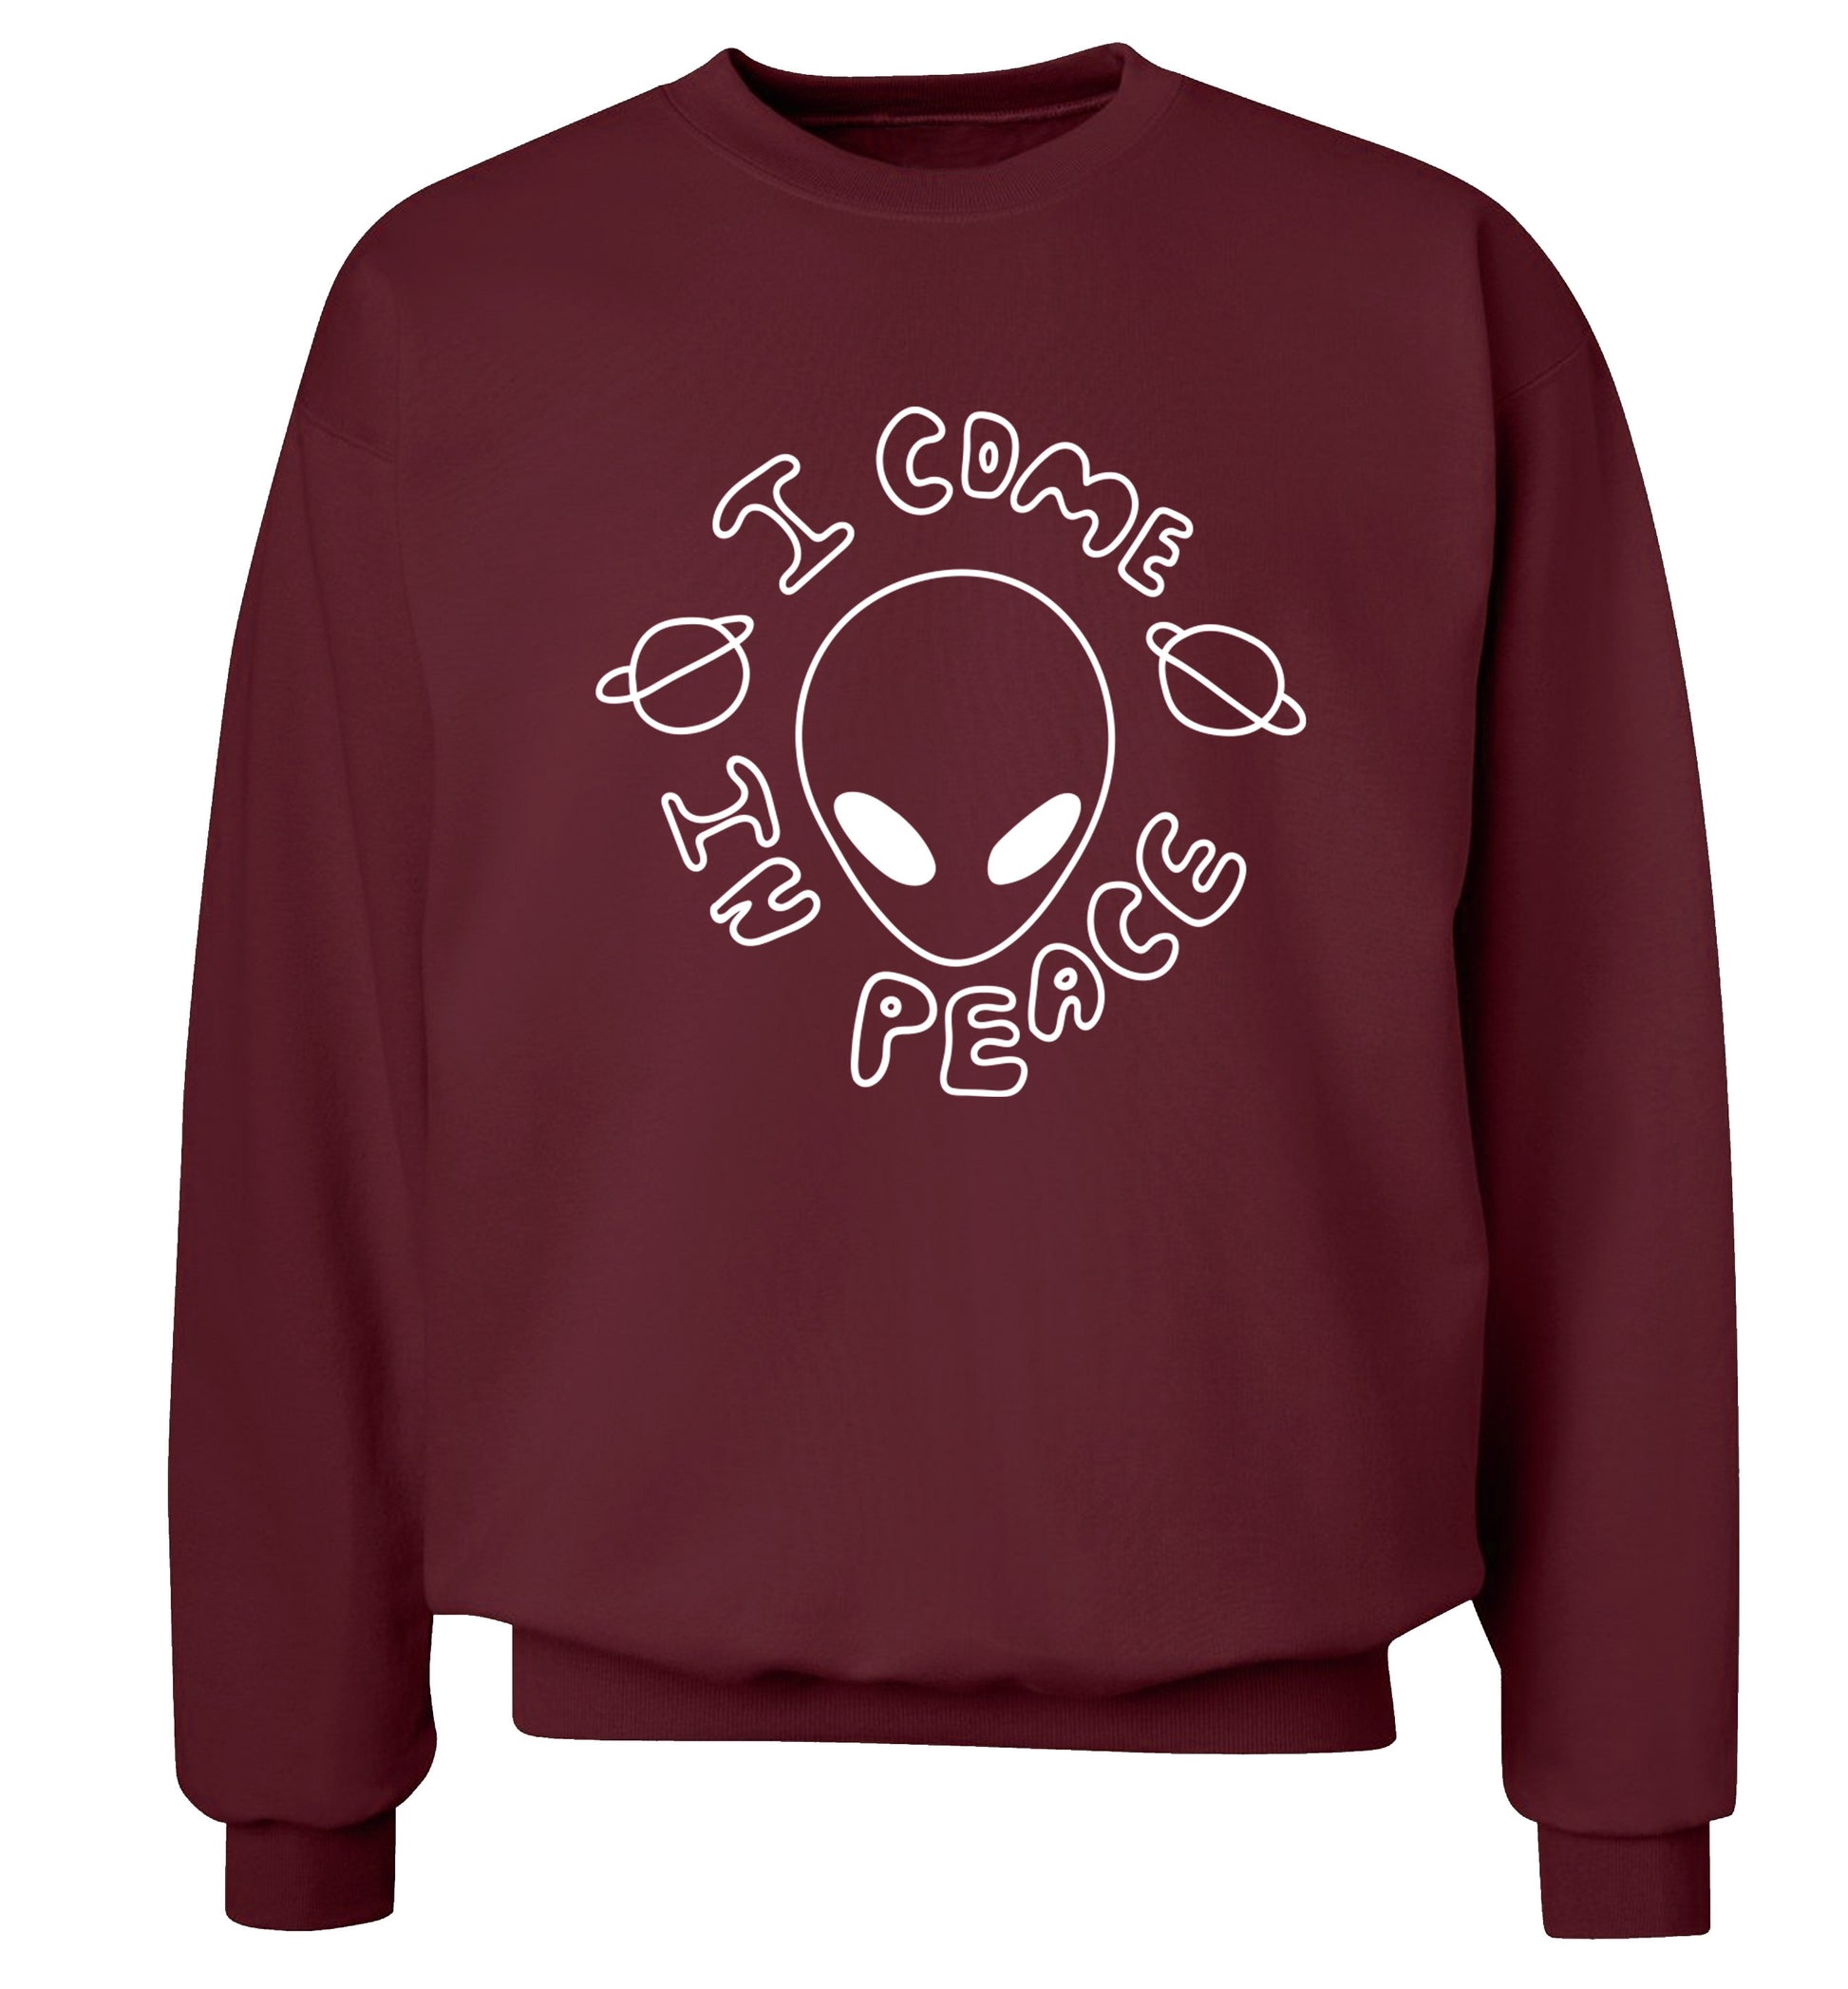 I come in peace Adult's unisex maroon Sweater 2XL